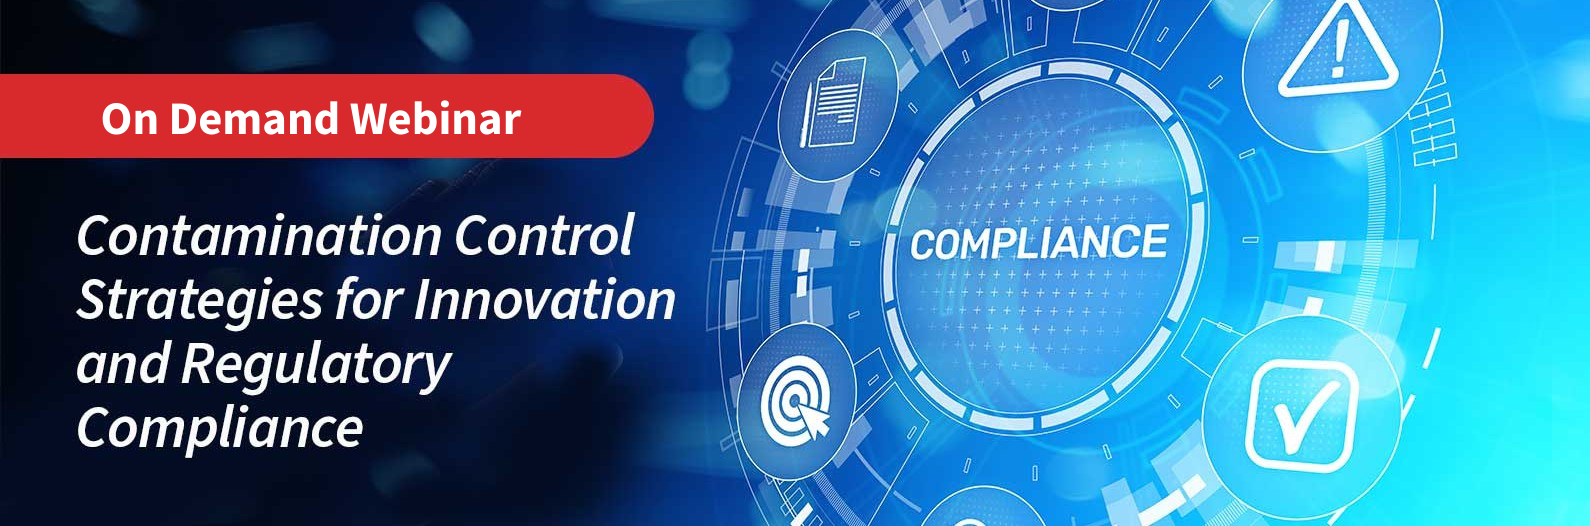 Contamination Control Strategies for Innovation and Regulatory Compliance on demand webinar banner